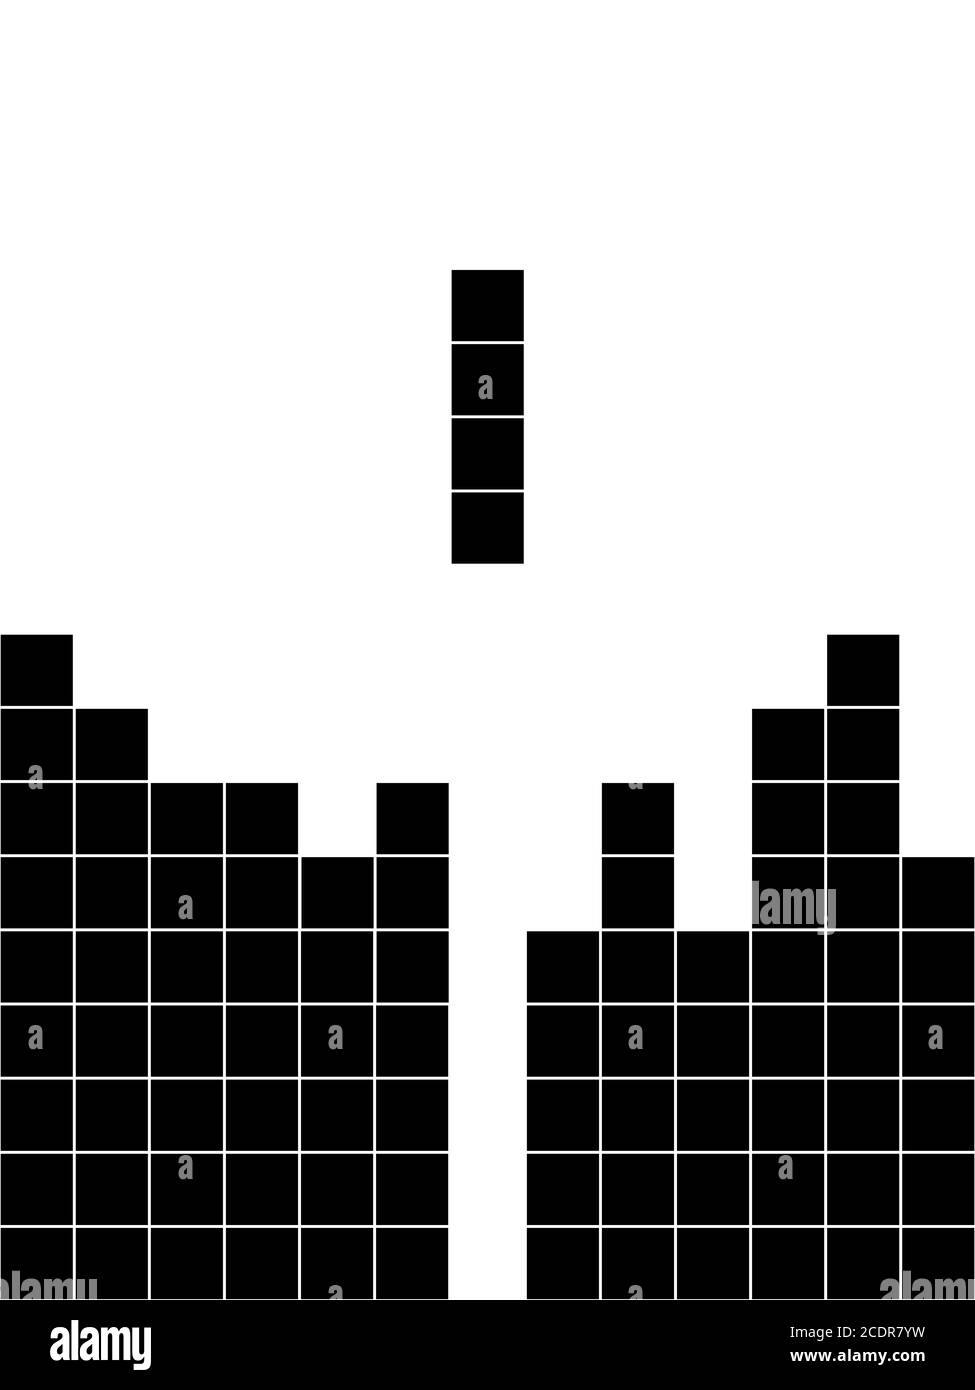 Black and white game illustration. Old video game Square template. Brick pieces game background. Game illustration with black squares. Stock Photo